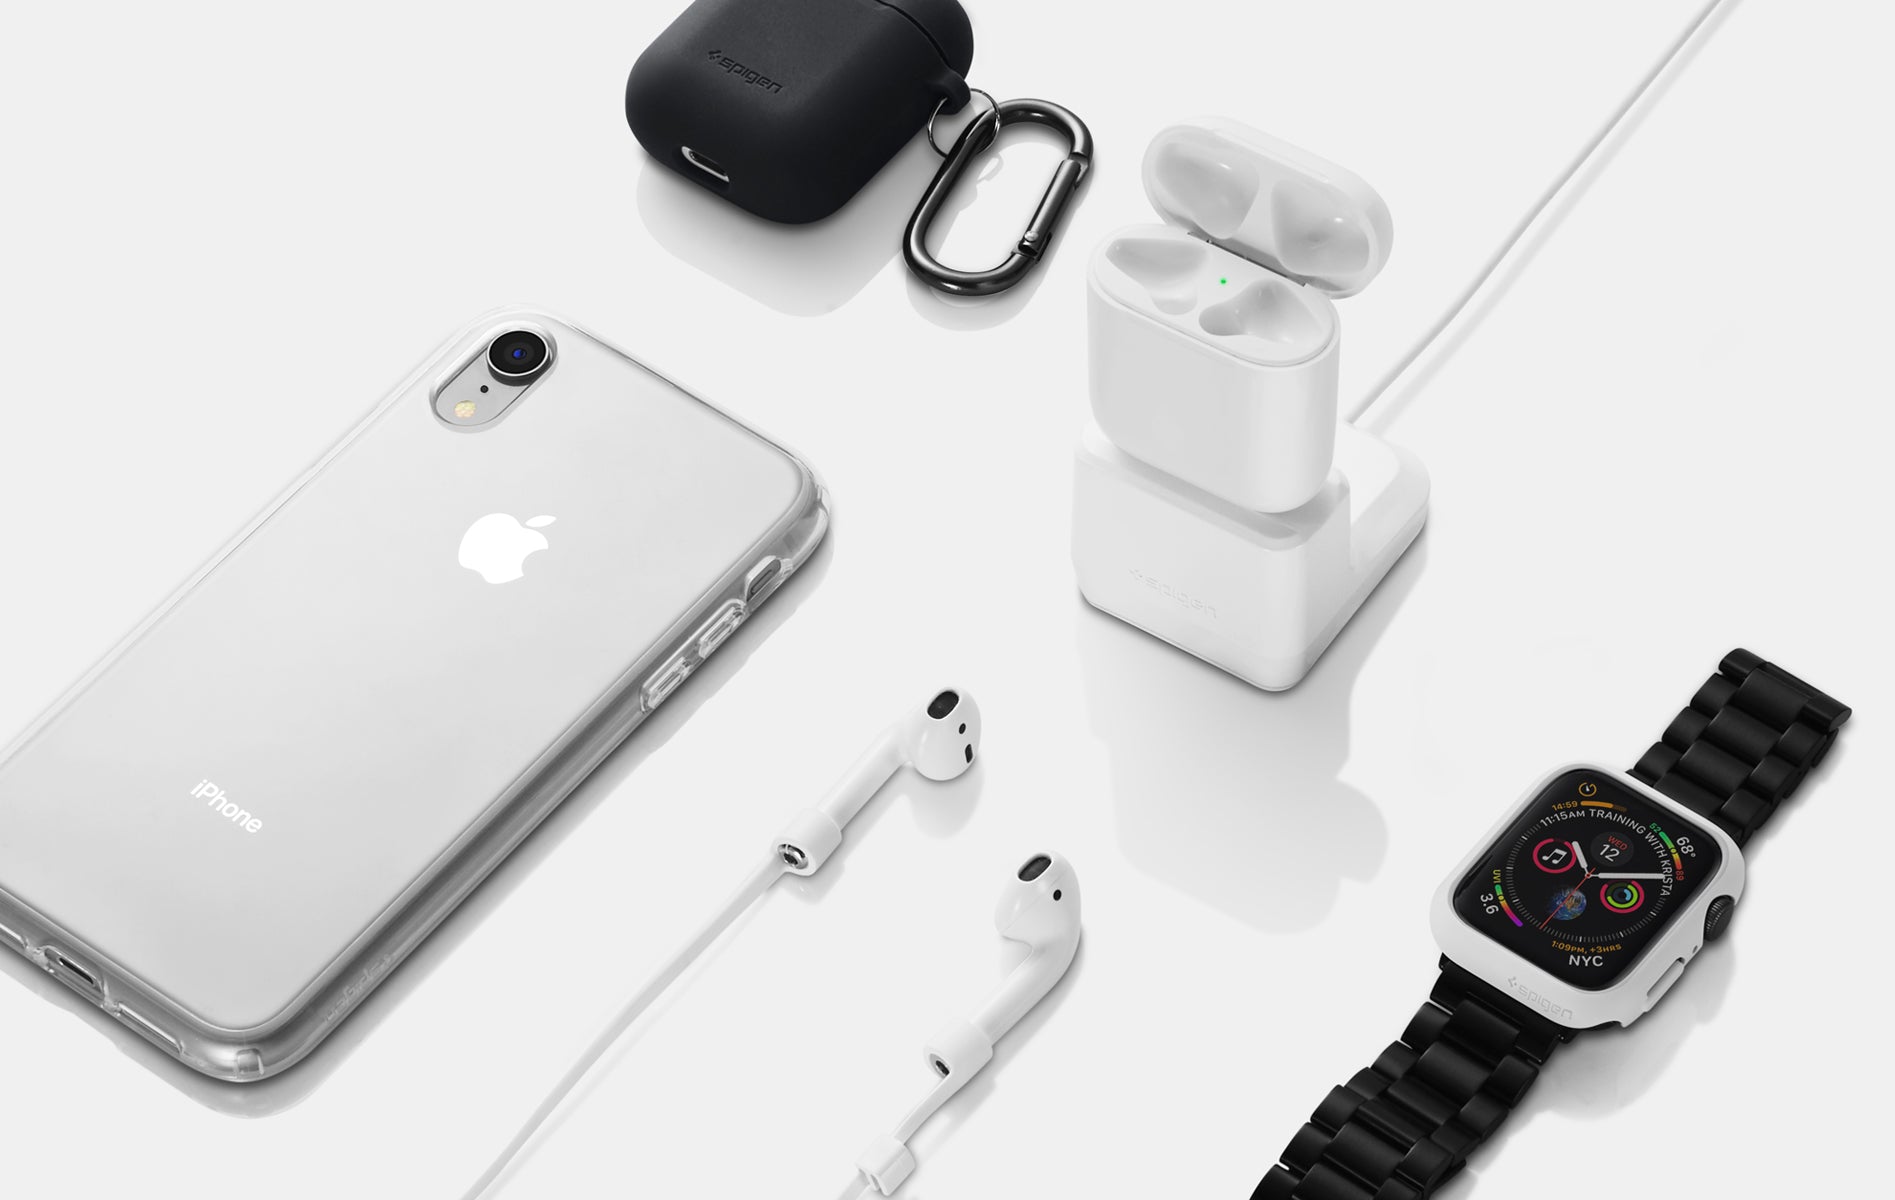 A collection of Airpods Silicone Black case, Airpods charger, iPhone in clear case, Airpods with a strap, and an Apple watch with black band.